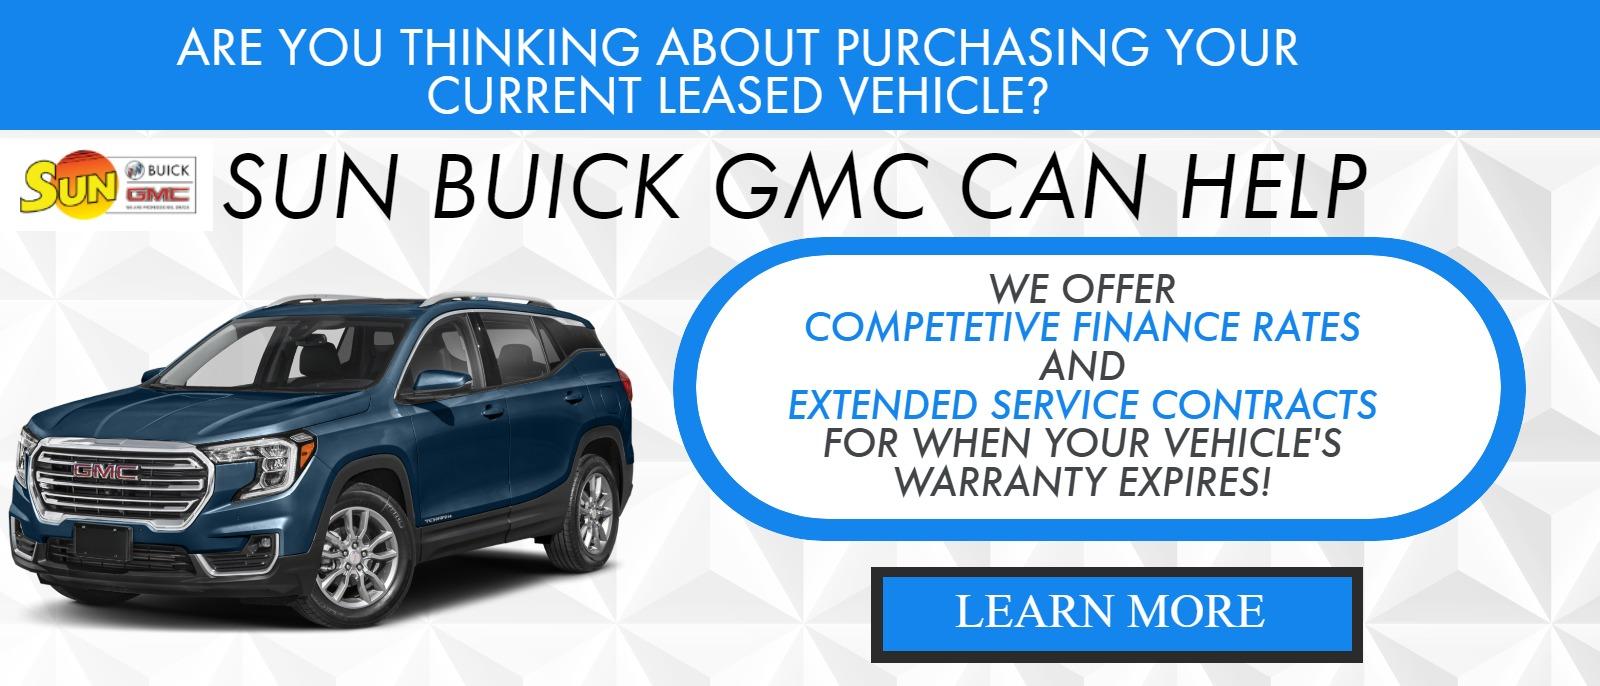 ARE YOU THINKING ABOUT PURCHASING YOUR CURRENT LEASED VEHICLE? SUN CAN HELP. WE OFFER COMPETETIVE FINANCE RATES AND EXTENDED SERVICE CONTRACTS FOR WHEN YOUR VEHICLE'S WARRANTY EXPIRES